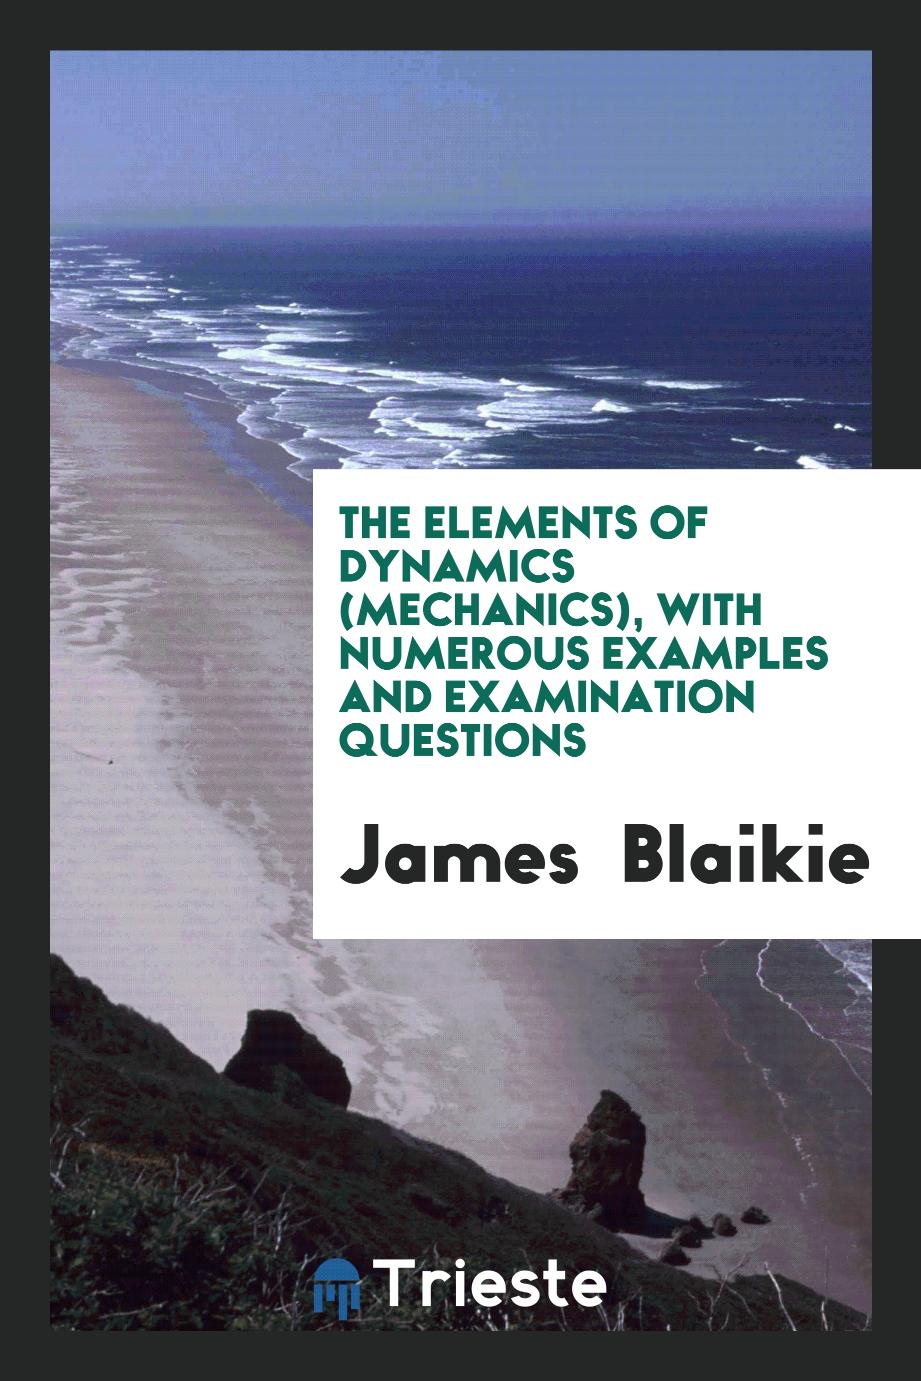 The Elements of Dynamics (Mechanics), with Numerous Examples and Examination Questions